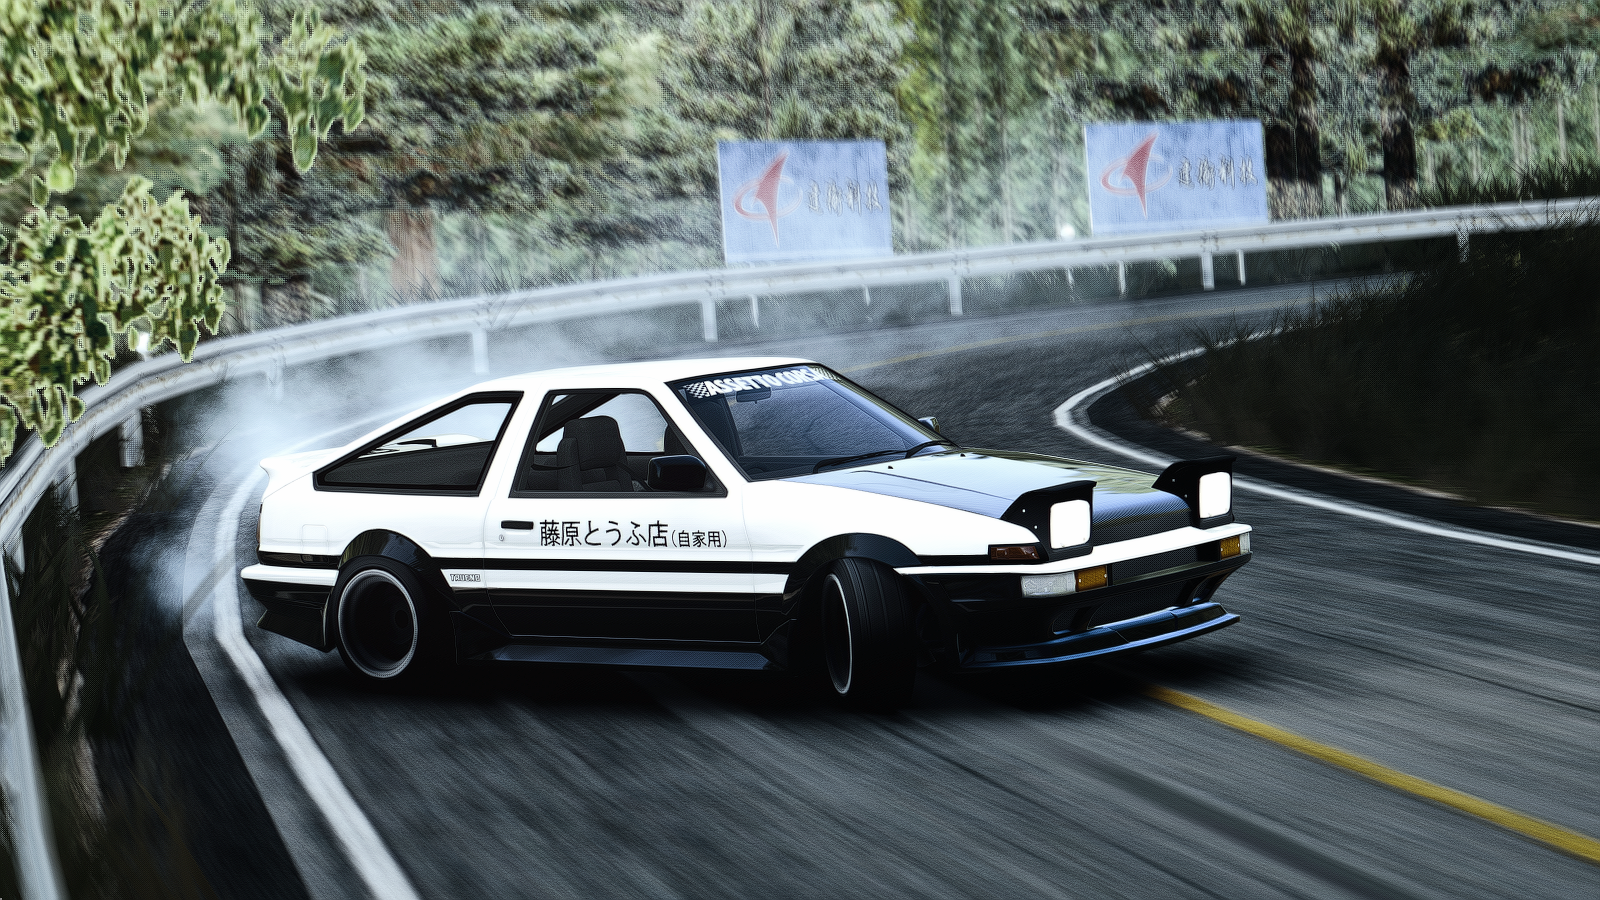 Ae86 Wallpaper Largest Collection 45 OFF lamphitrite palacecom